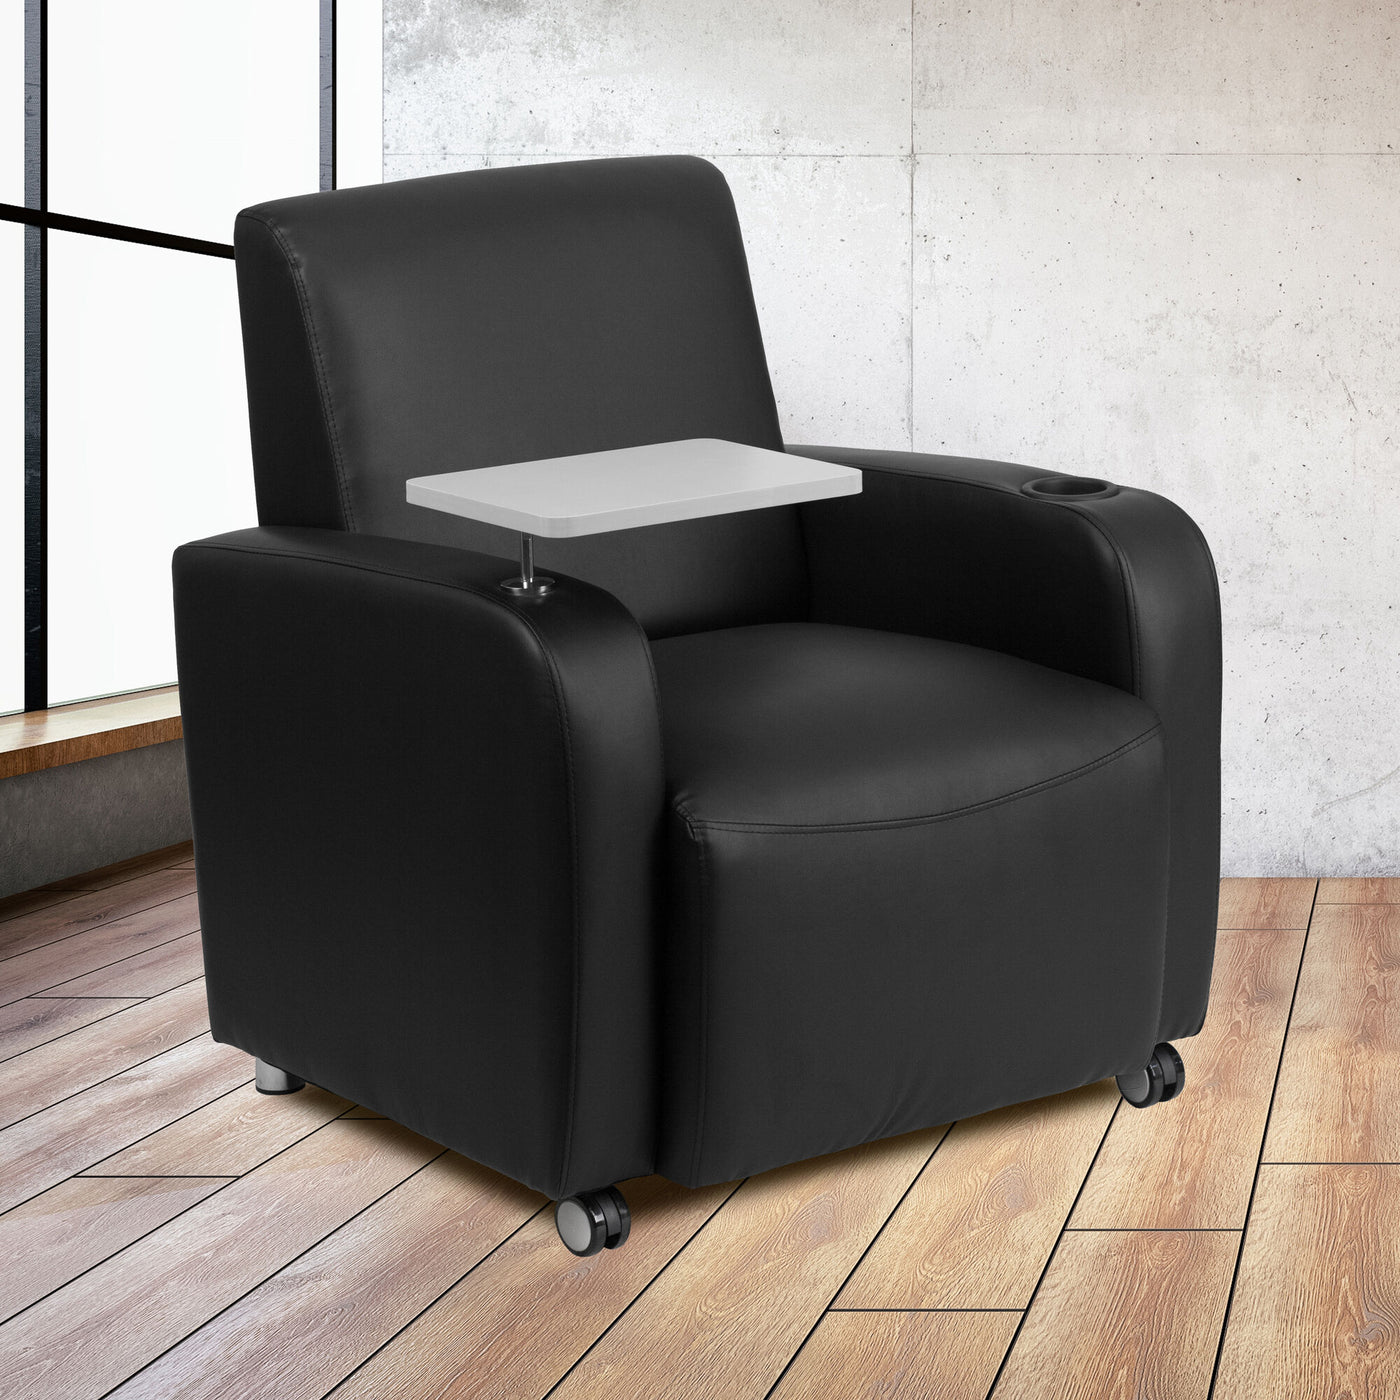 George Black LeatherSoft Guest Chair with Tablet Arm, Front Wheel Casters and Cup Holder - $150